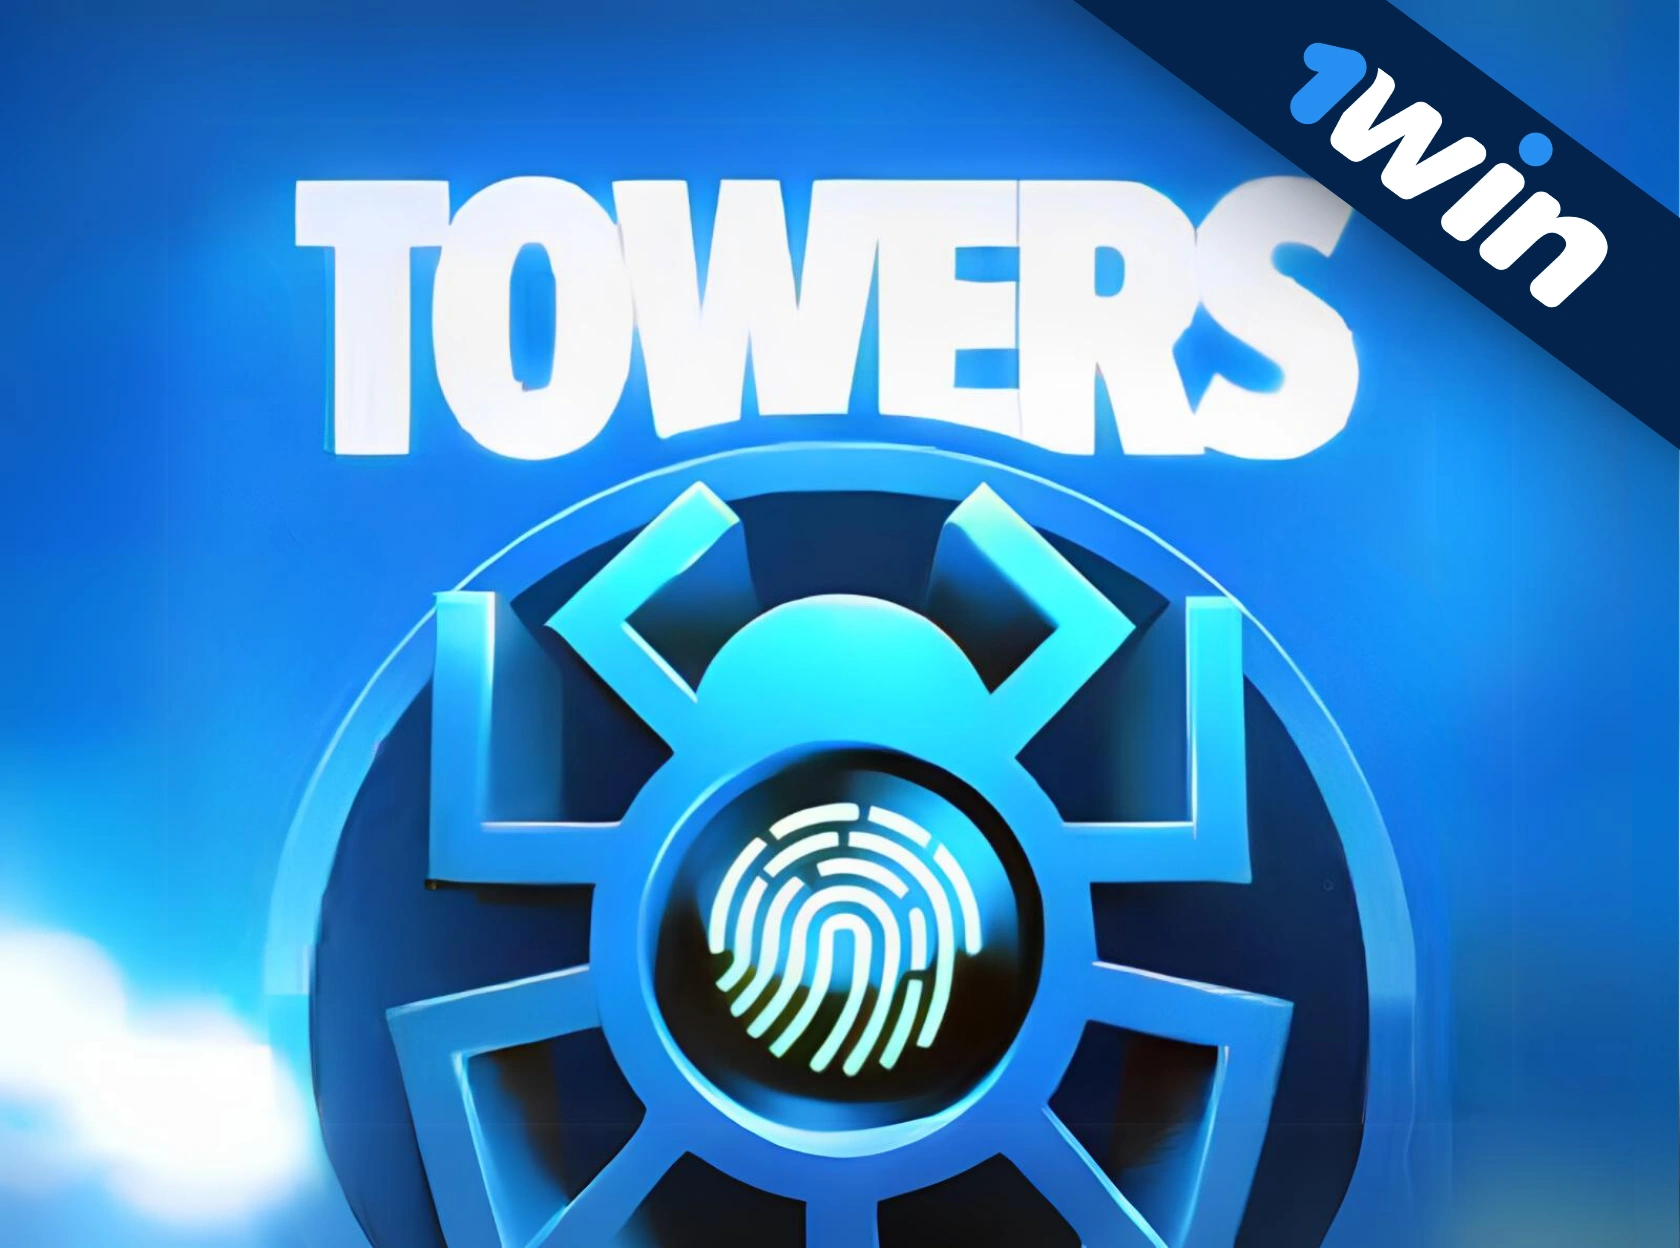 Towers on the 1win casino website